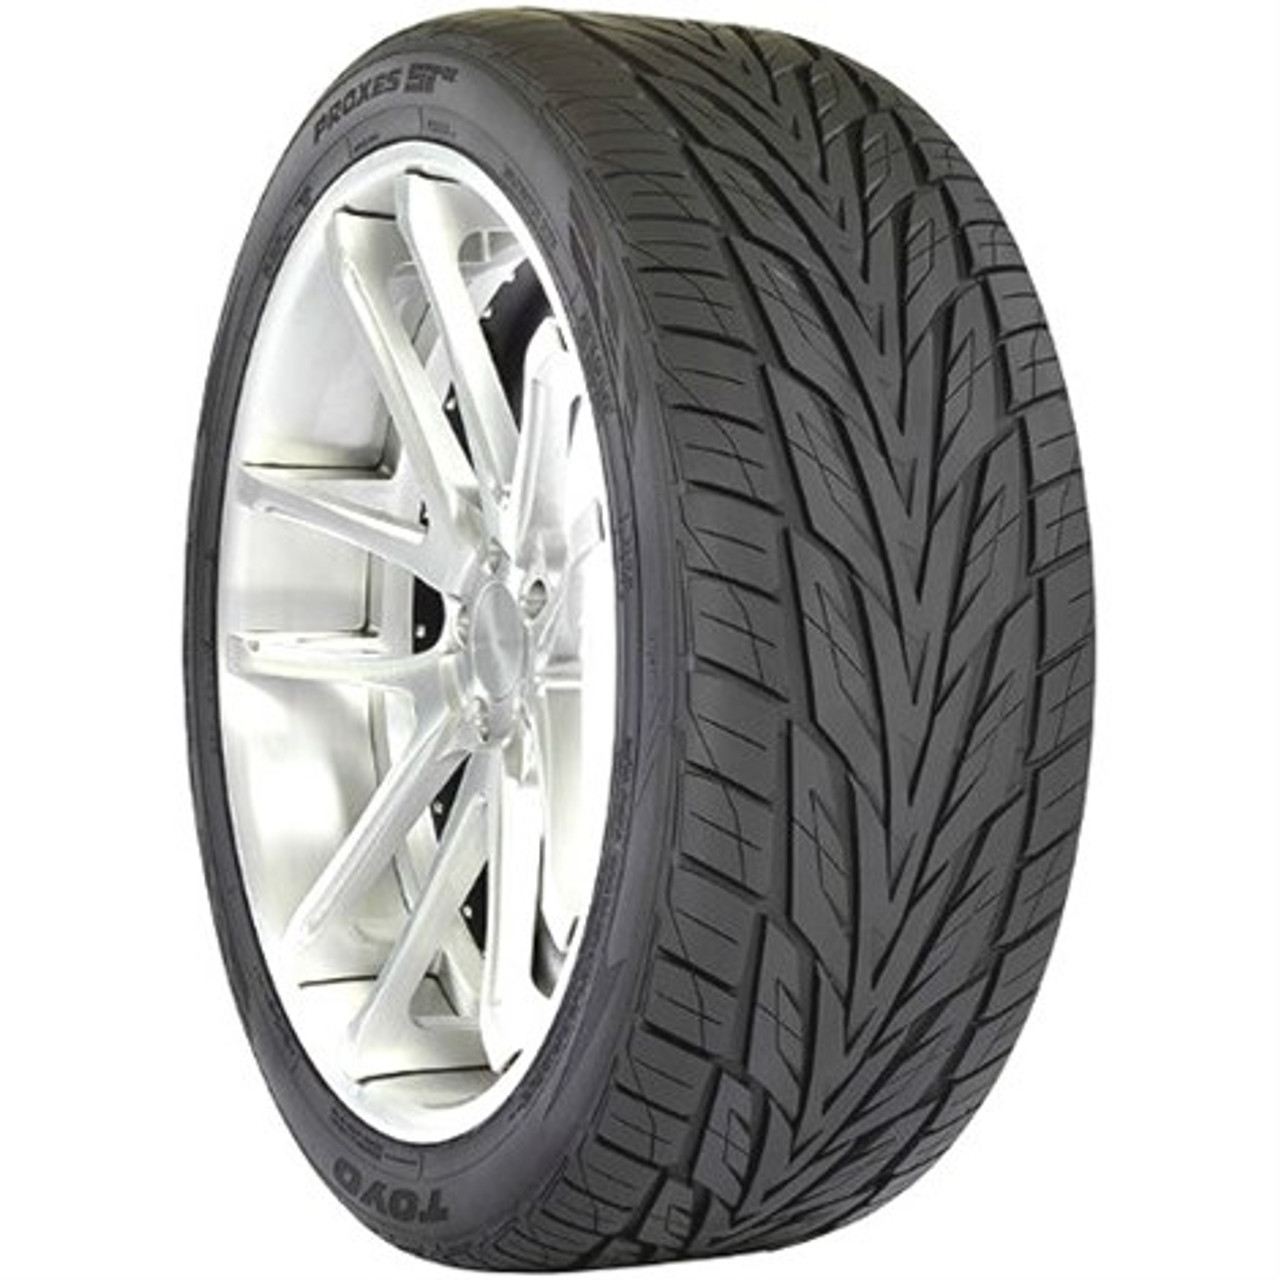 Toyo Proxes ST III Tire - 295/40R20